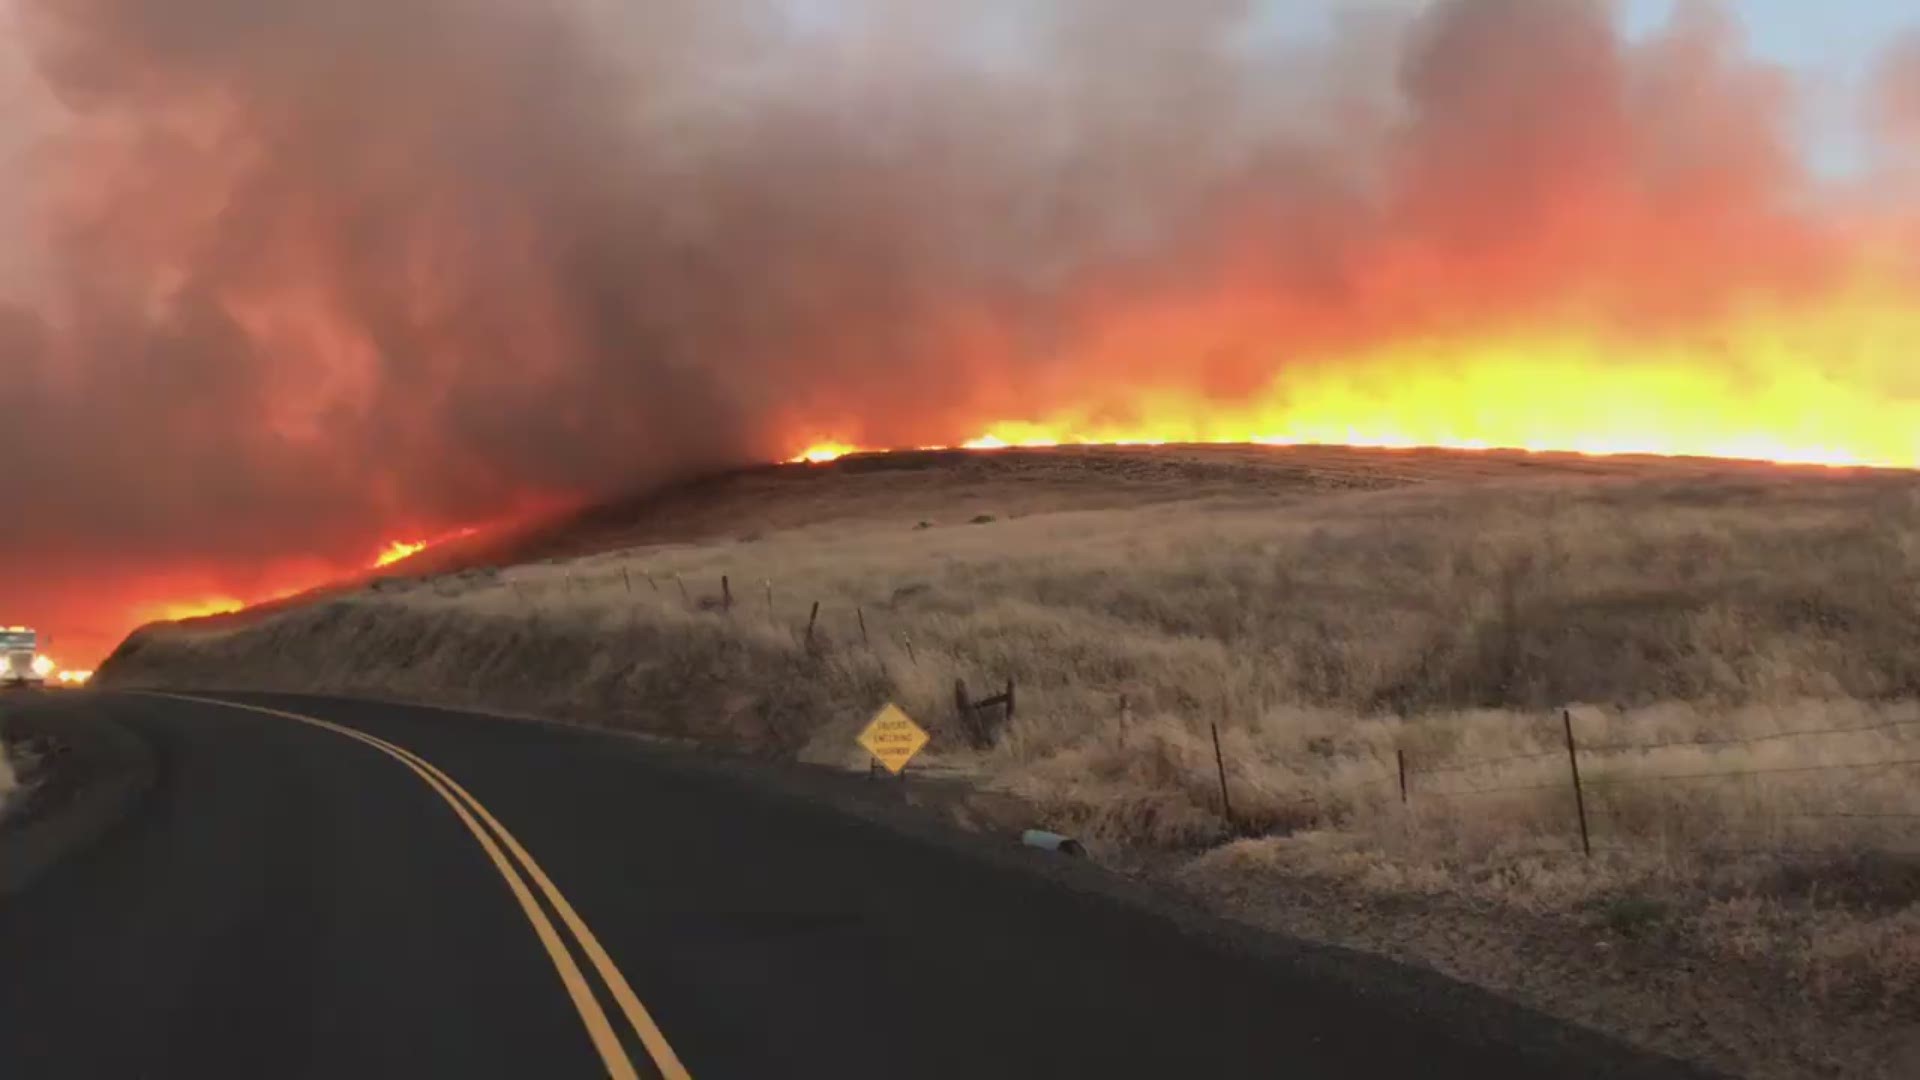 Footage from the fire line on Gordon Ridge Rd near Hwy 206. Great example of why road closures should be heeded. These closures are for both your safety and the firefighters that need to focus on the fire's behavior.